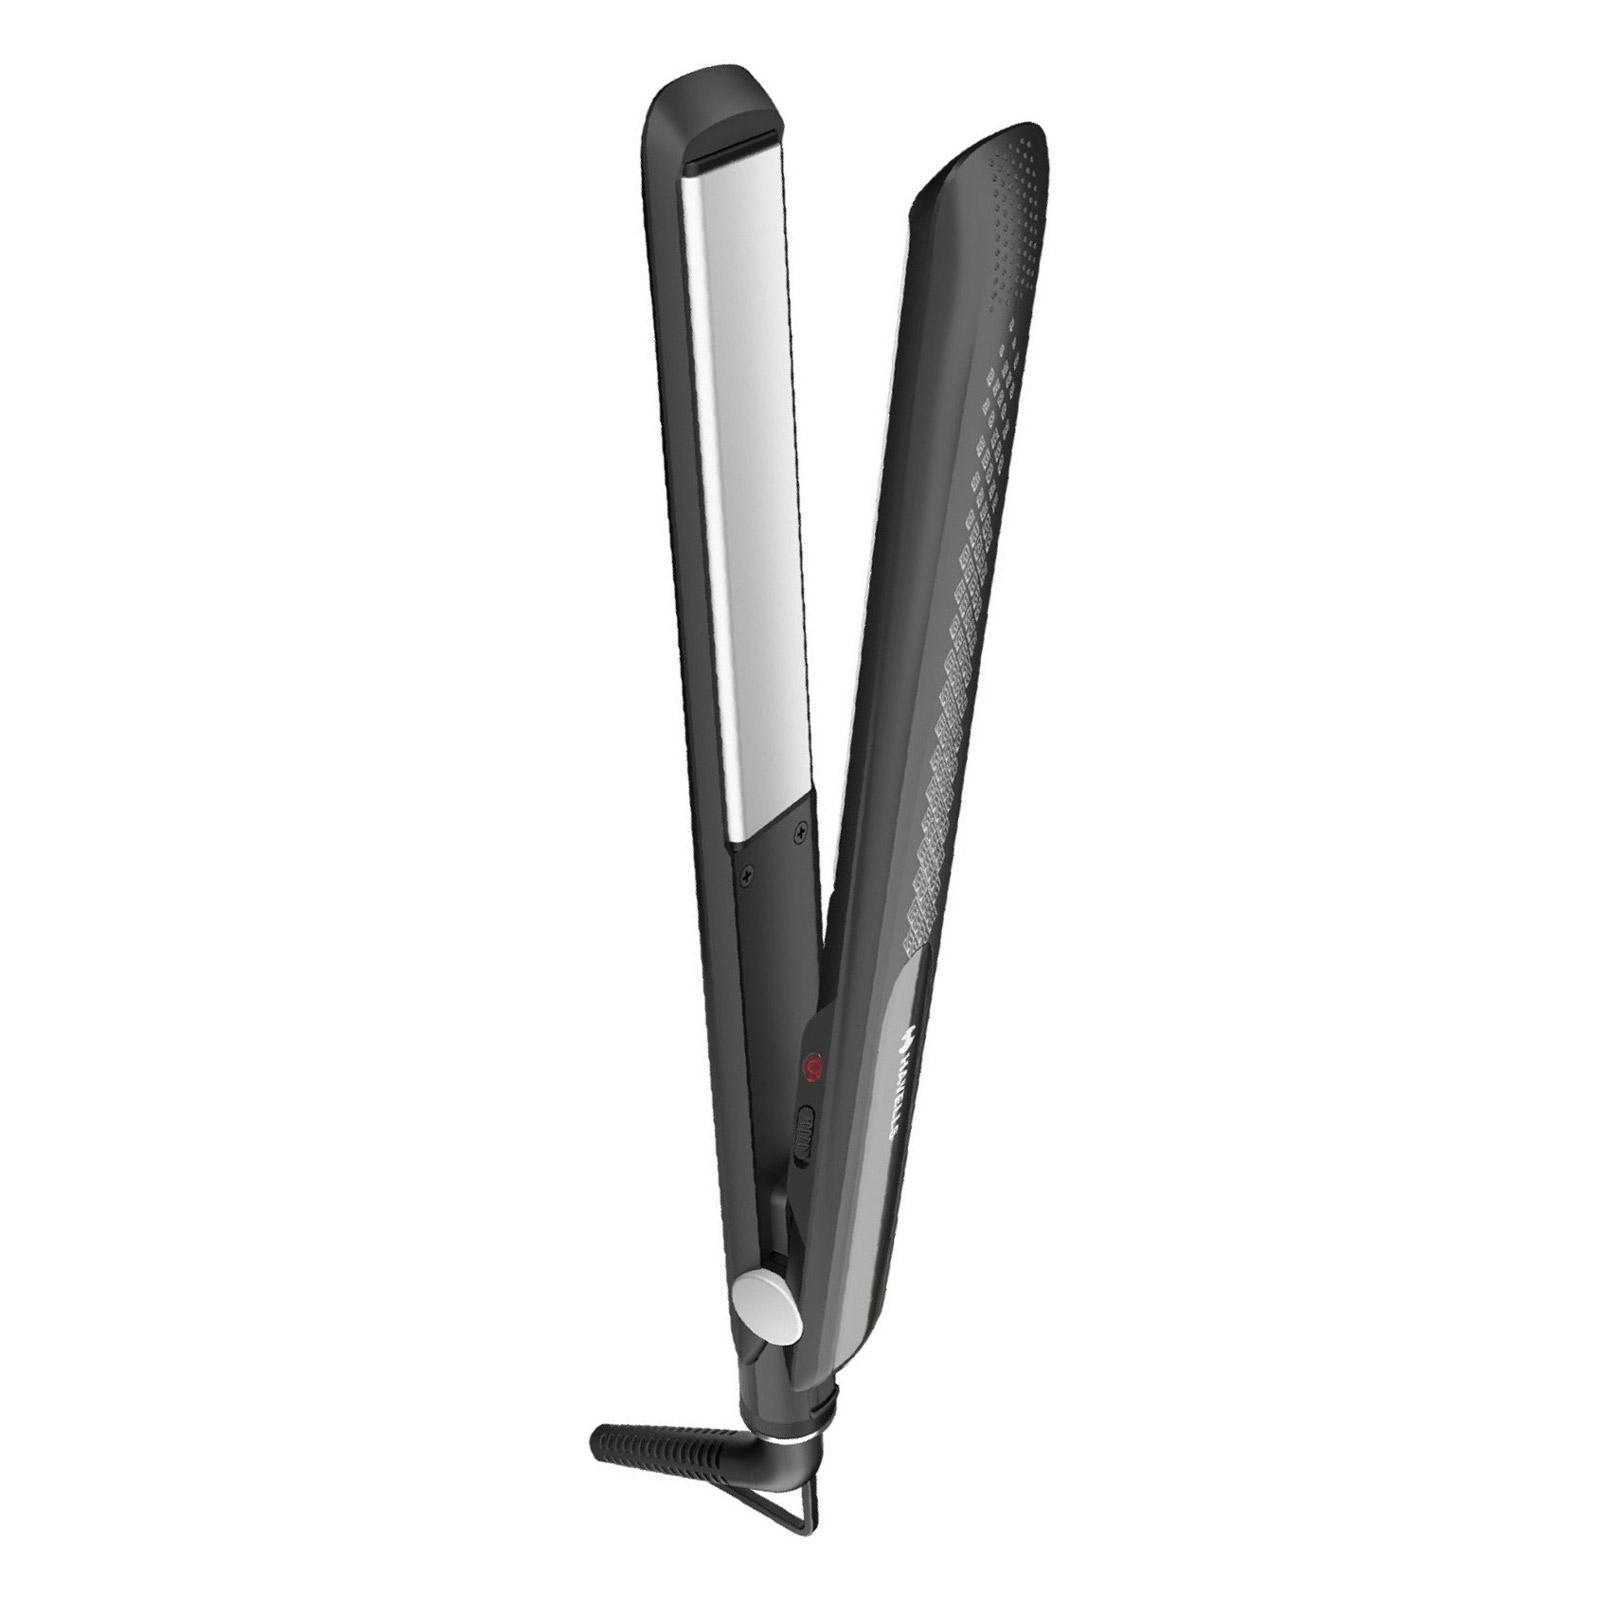 Buy Havells HS4106 Hair Straightener Online | Best Online Shopping in India  | Shop Mobiles, Laptops, Home Appliances & more at Best Offers & Deals!